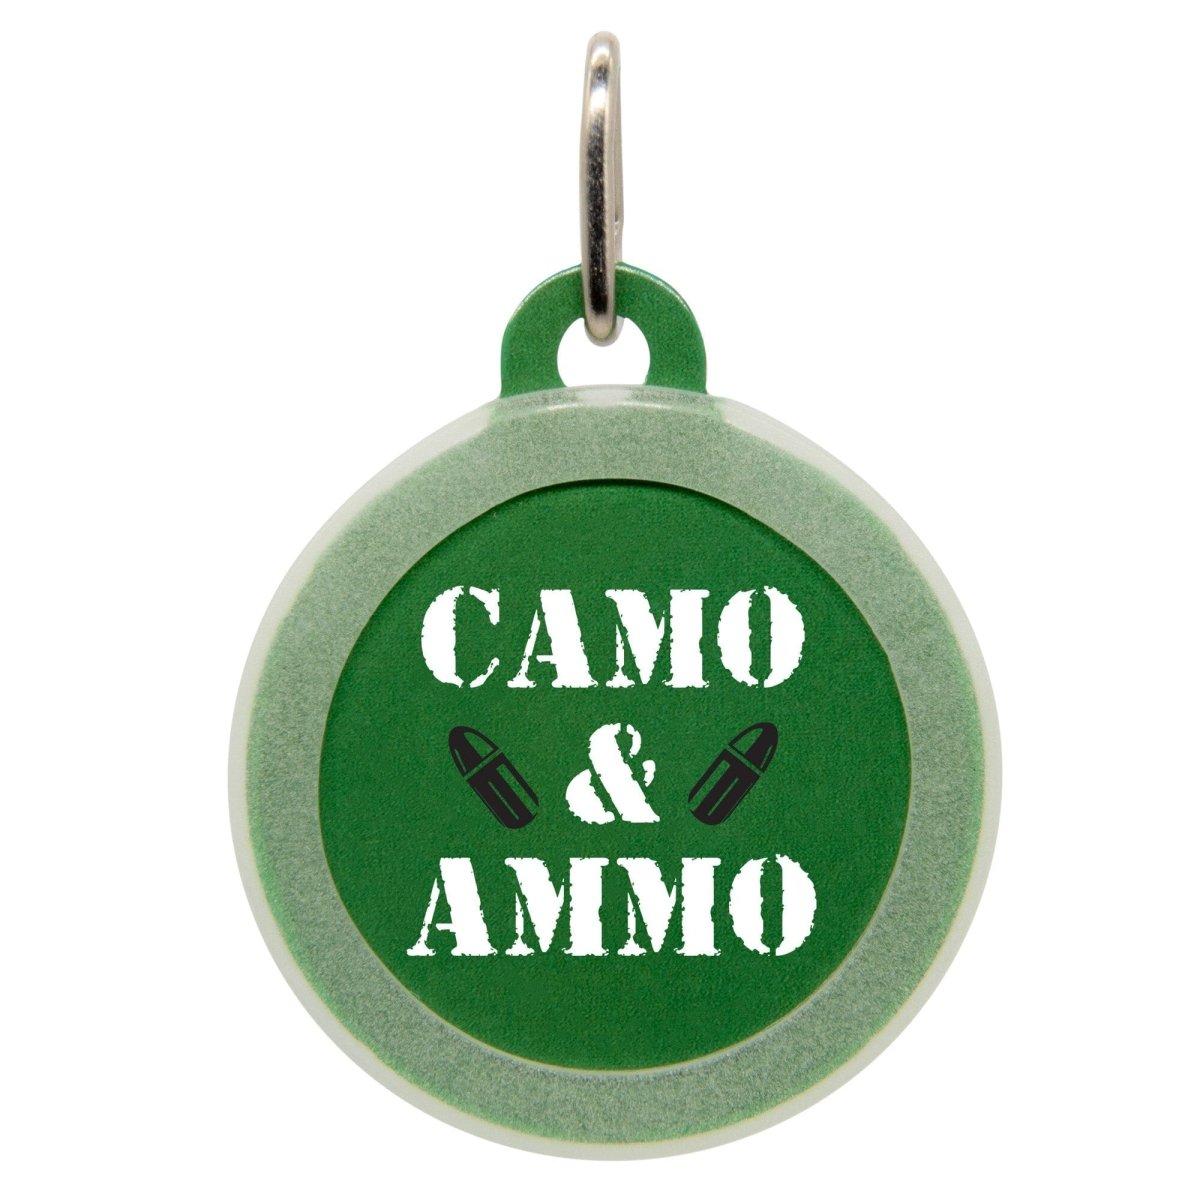 Camo & Ammo Name Tag - Oh My Paw'd